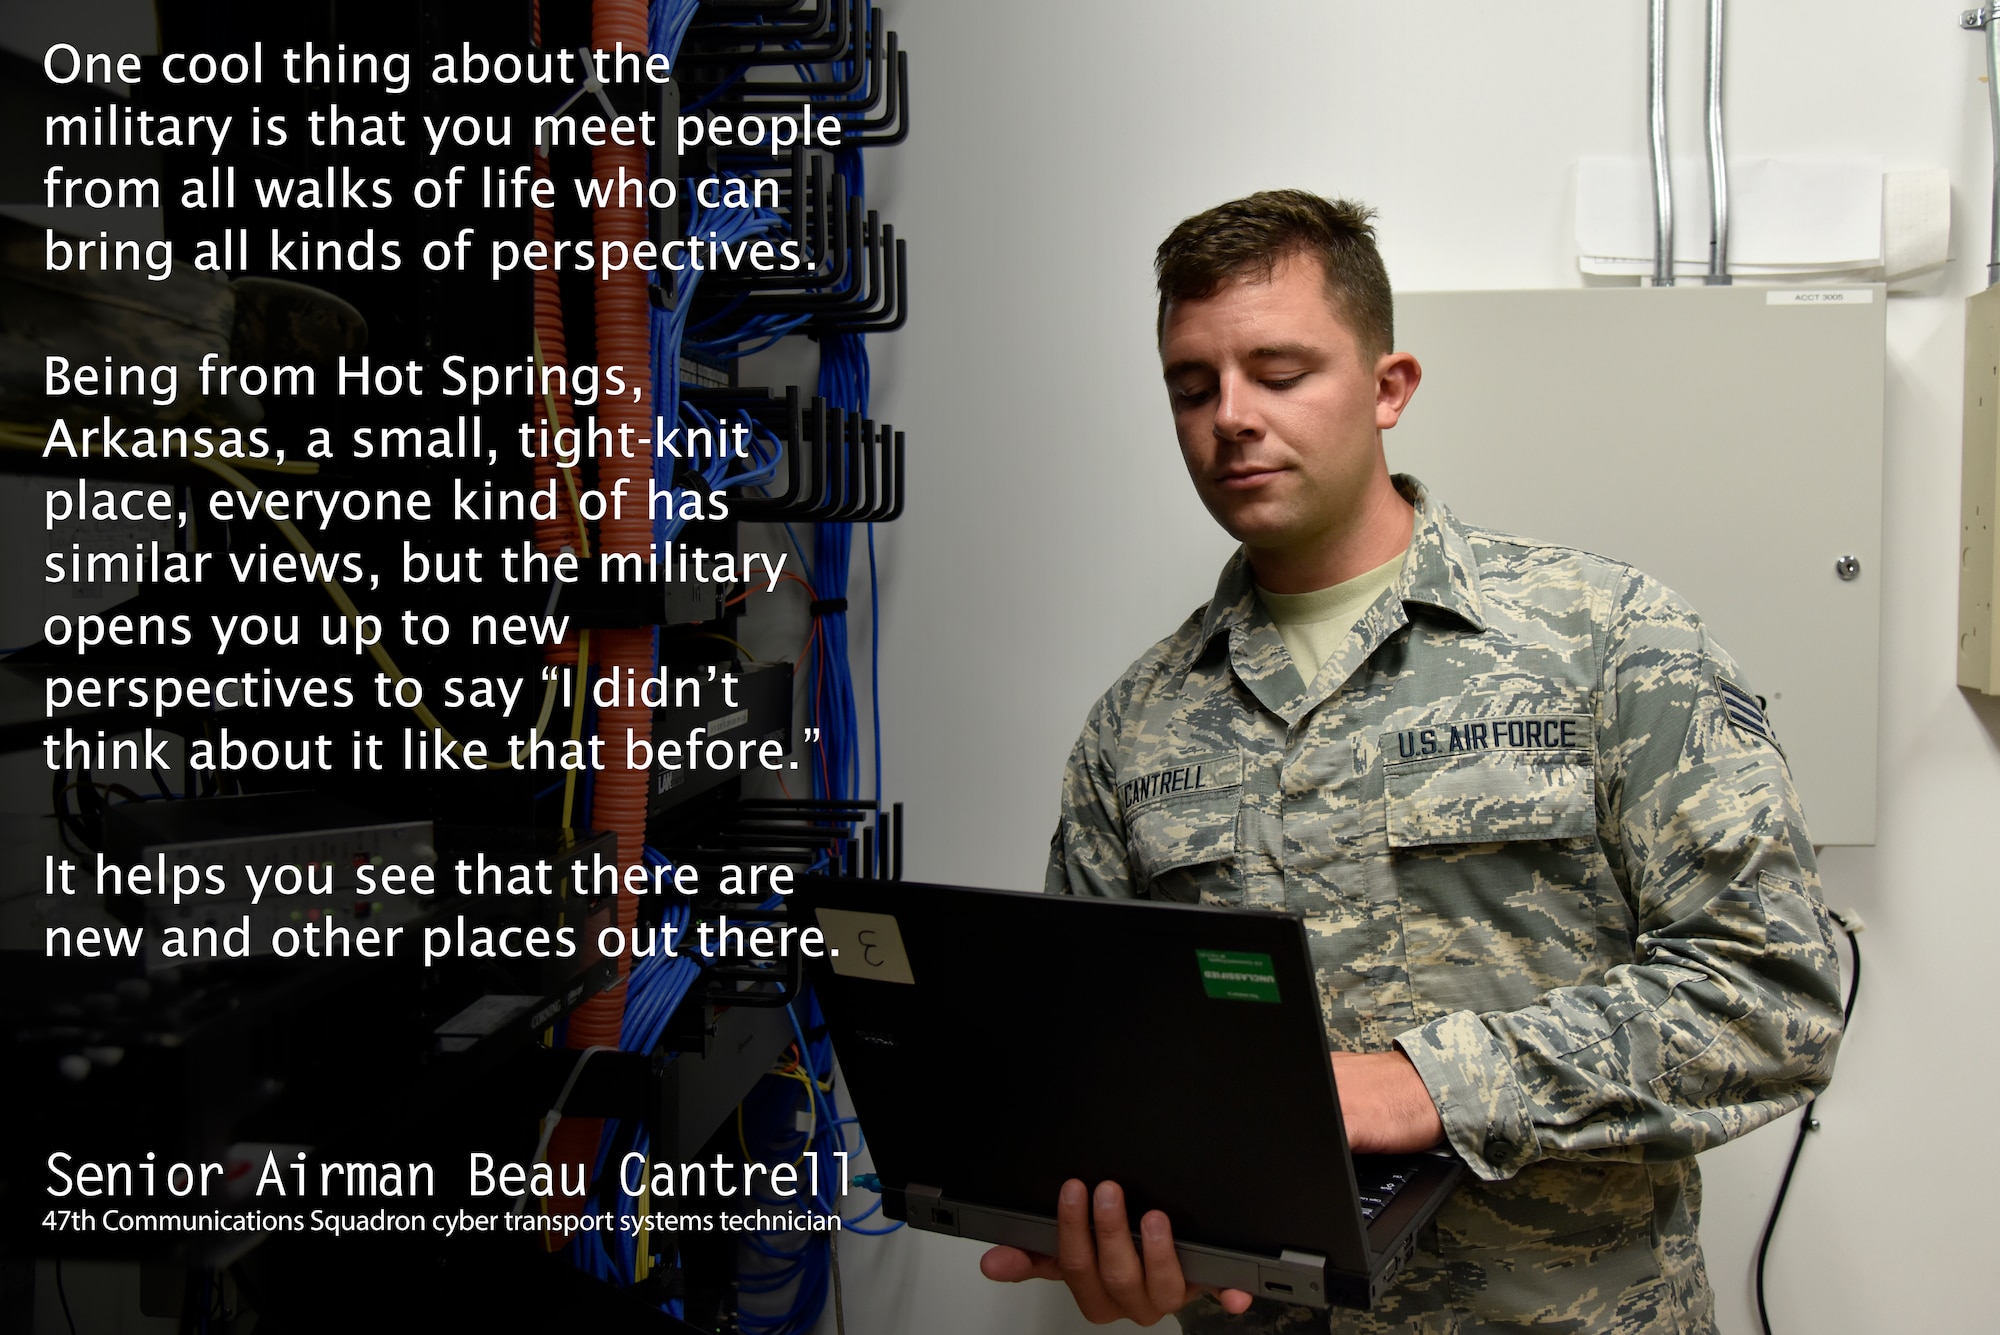 Senior Airman Beau Cantrell, a 47th Communications Squadron cyber transport systems technician, appreciates the new perspectives that the military provides him, bringing together people from all over the United States and the world. Though not every idea is a great one, every bad idea can be a launch pad for a good discussion into a great idea. (U.S. Air Force graphic by Senior Airman John A. Crawford)